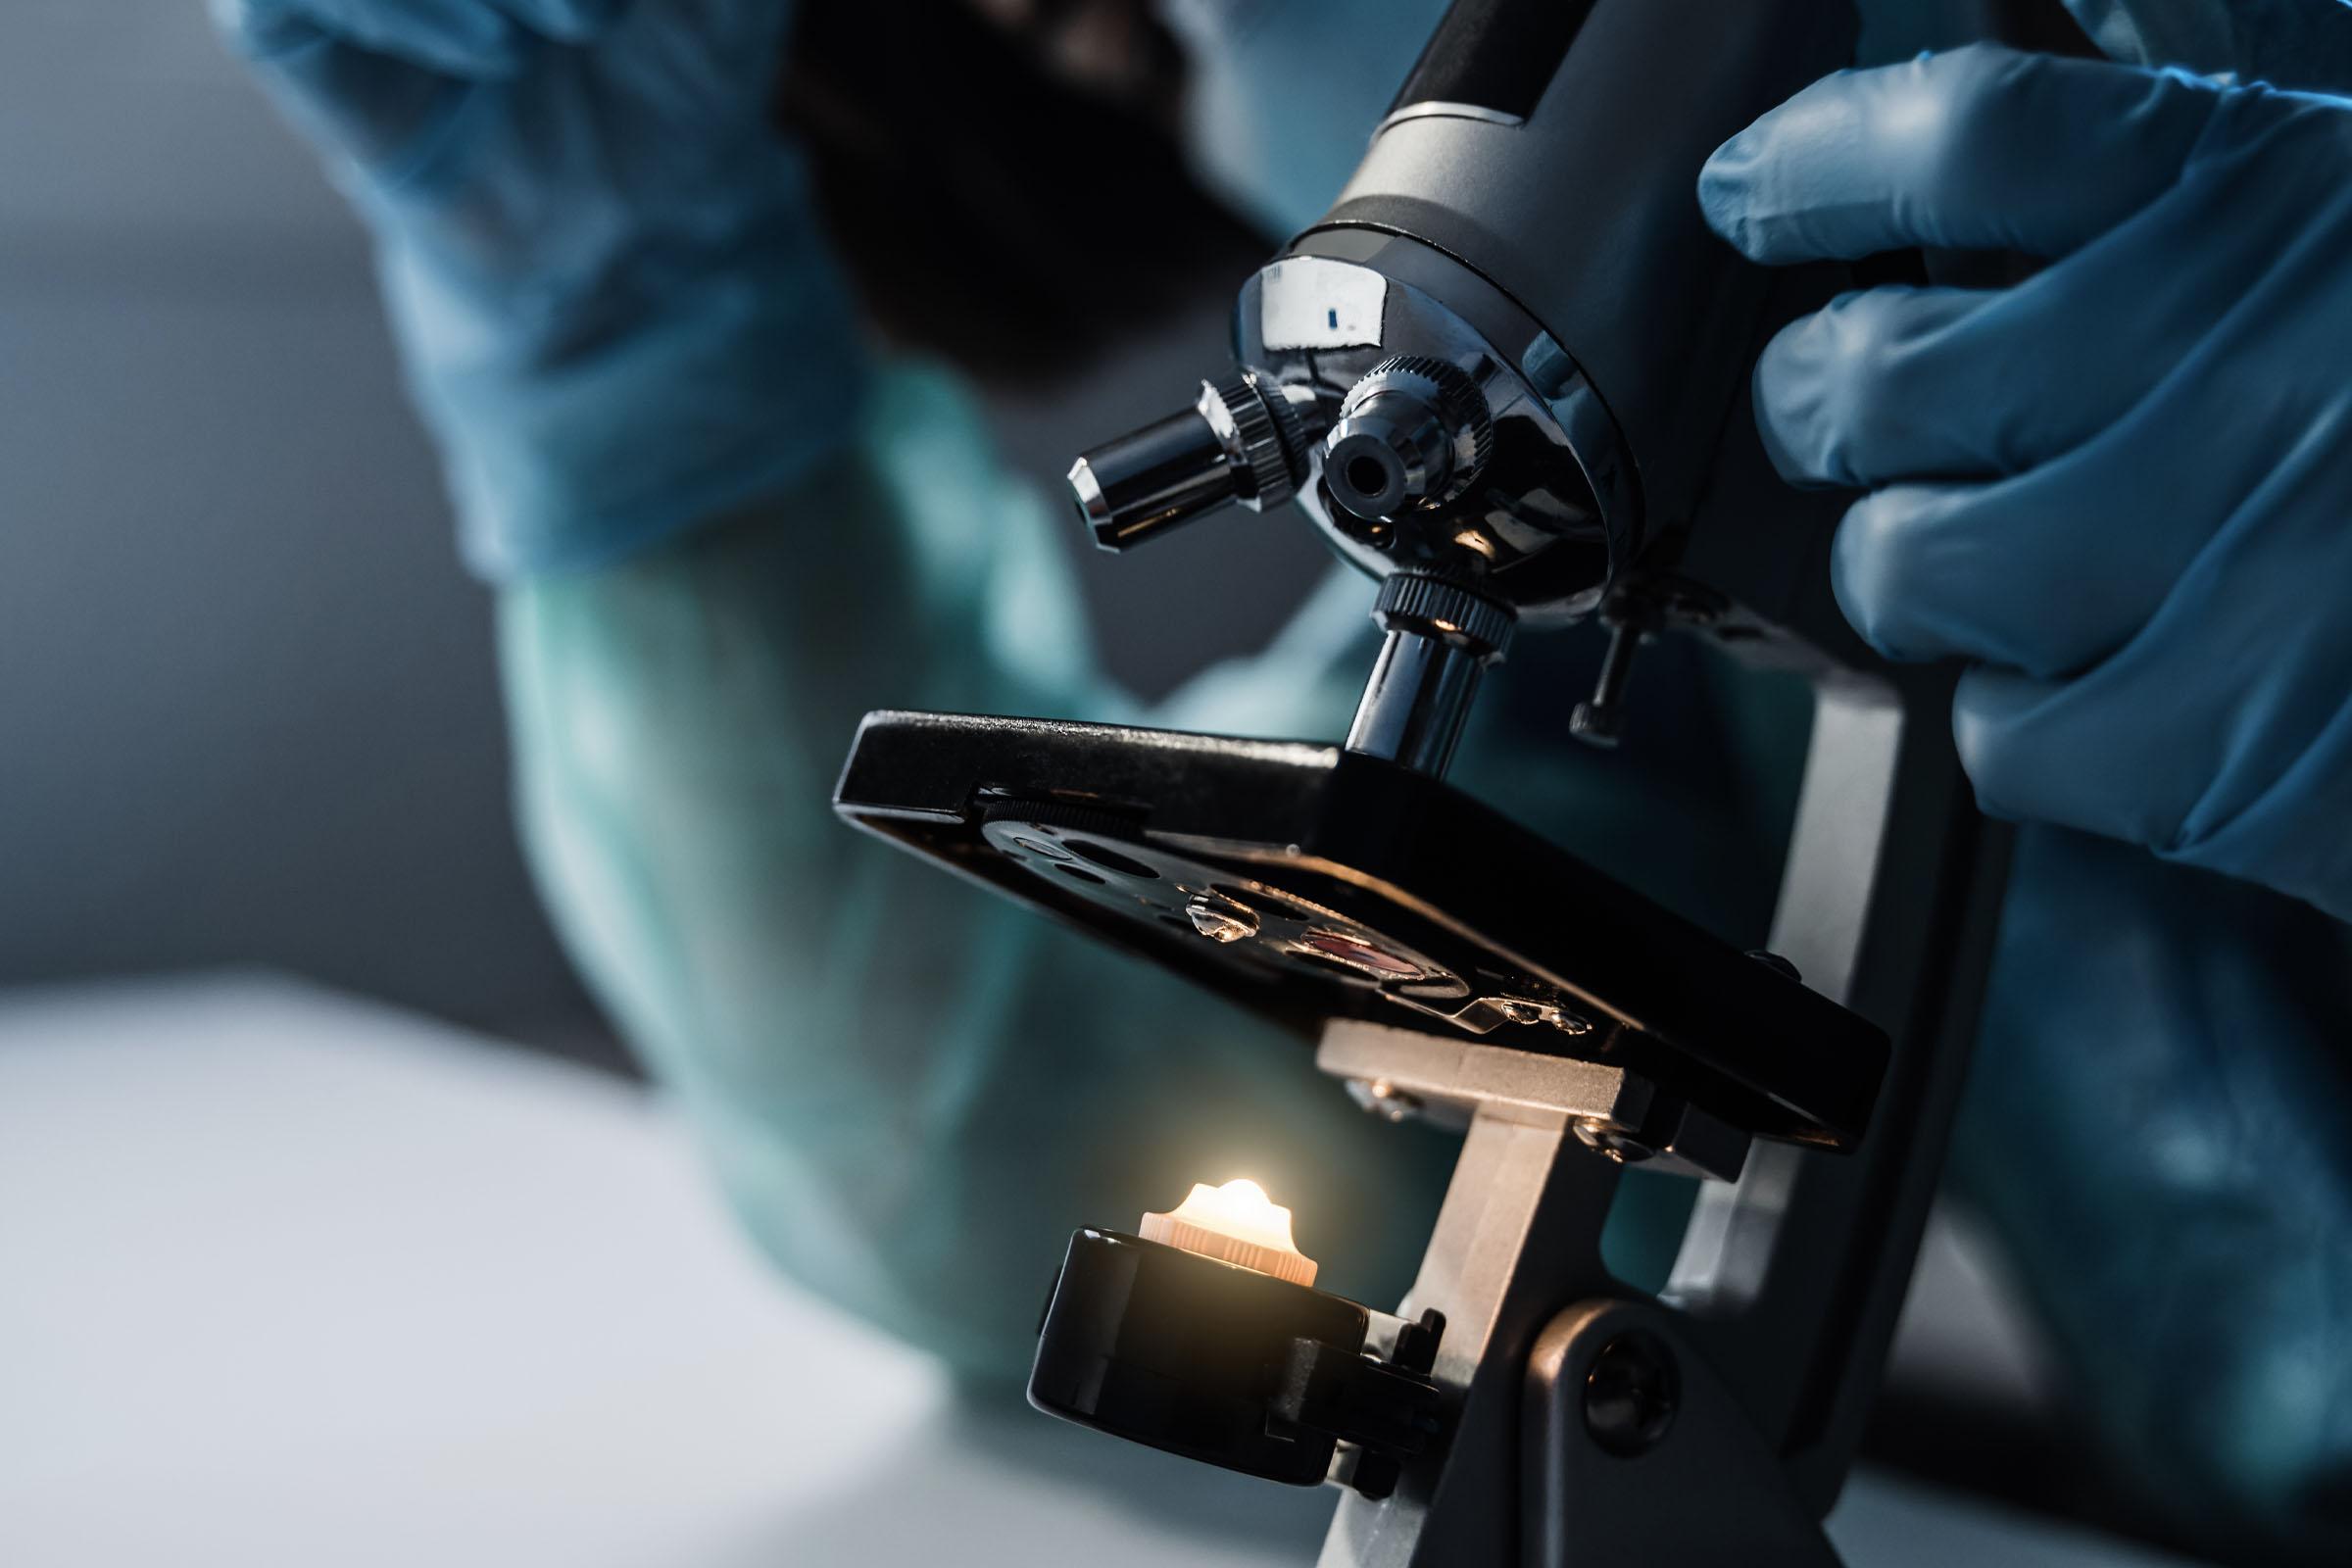 A microscope in focus with a person in personal protective equipment adjusting it